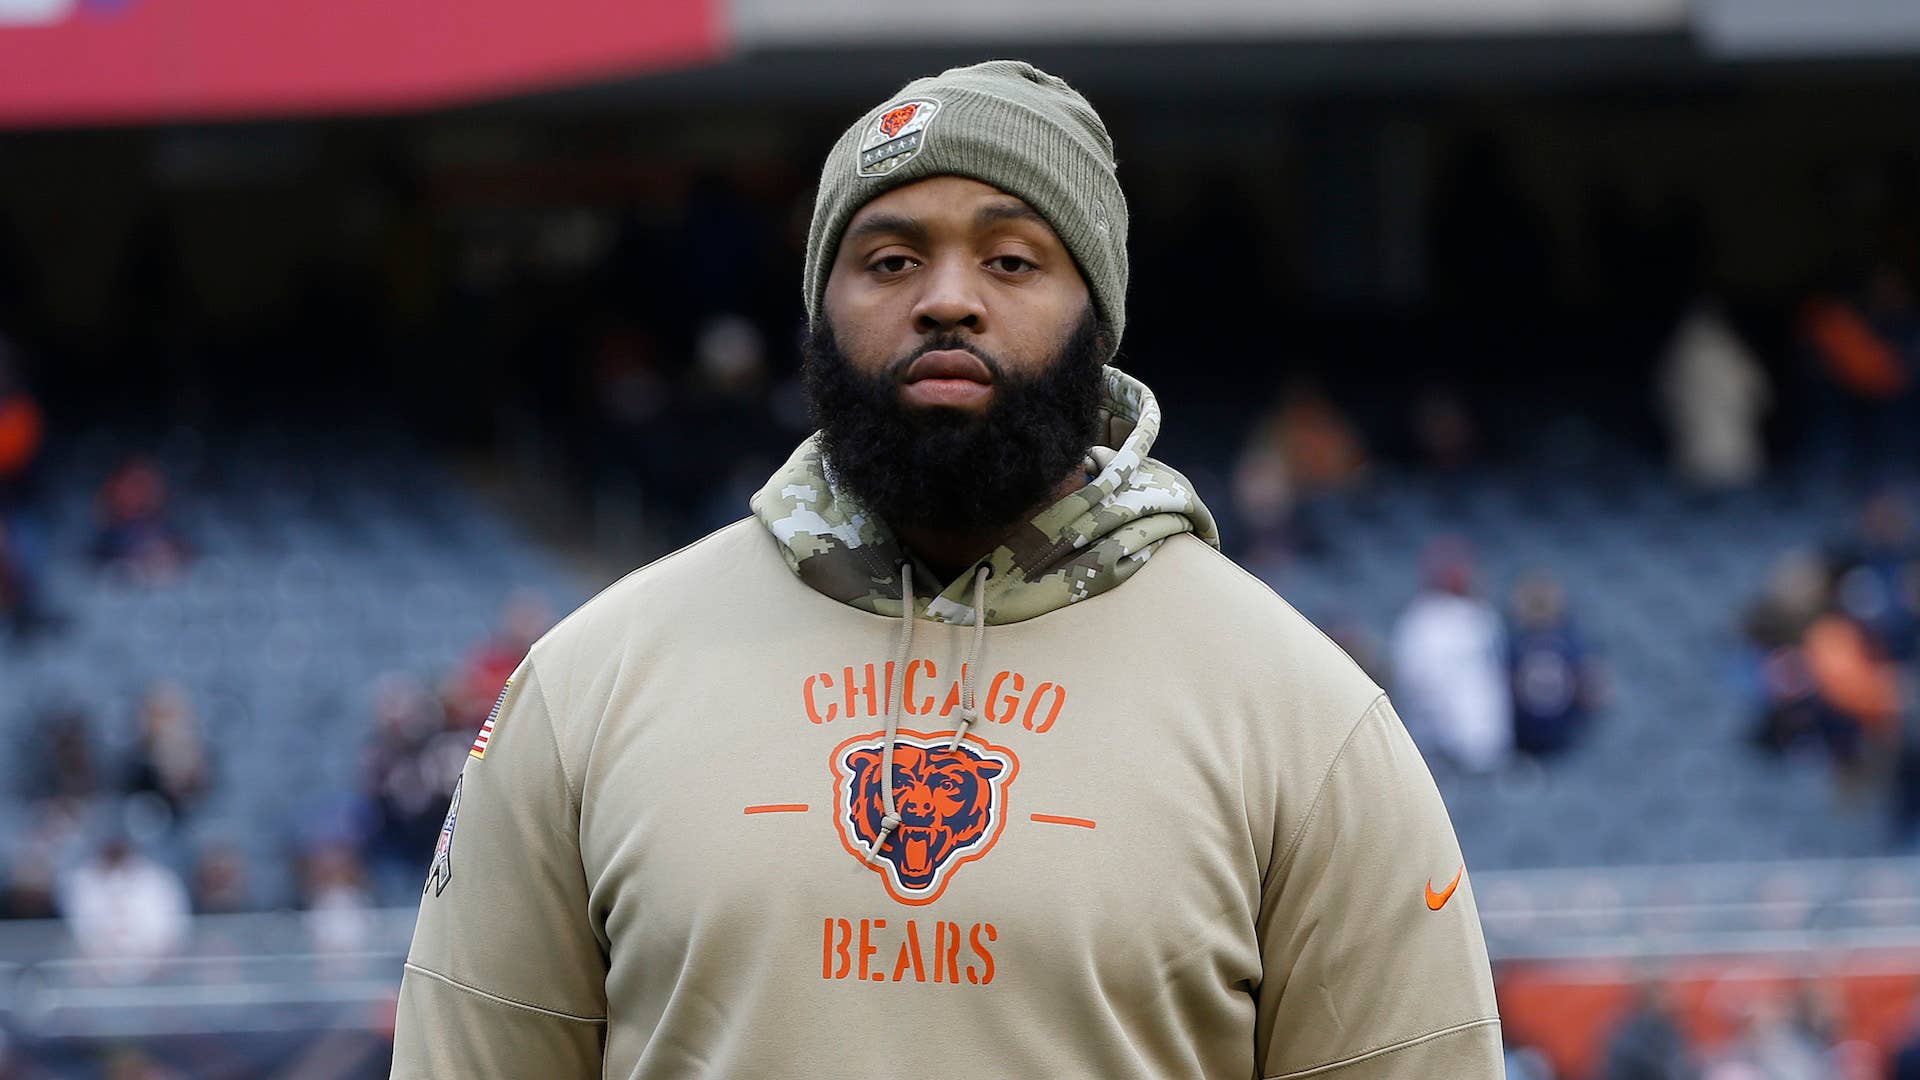 Akiem Hicks stands on the field prior to a game against the Detroit Lions.